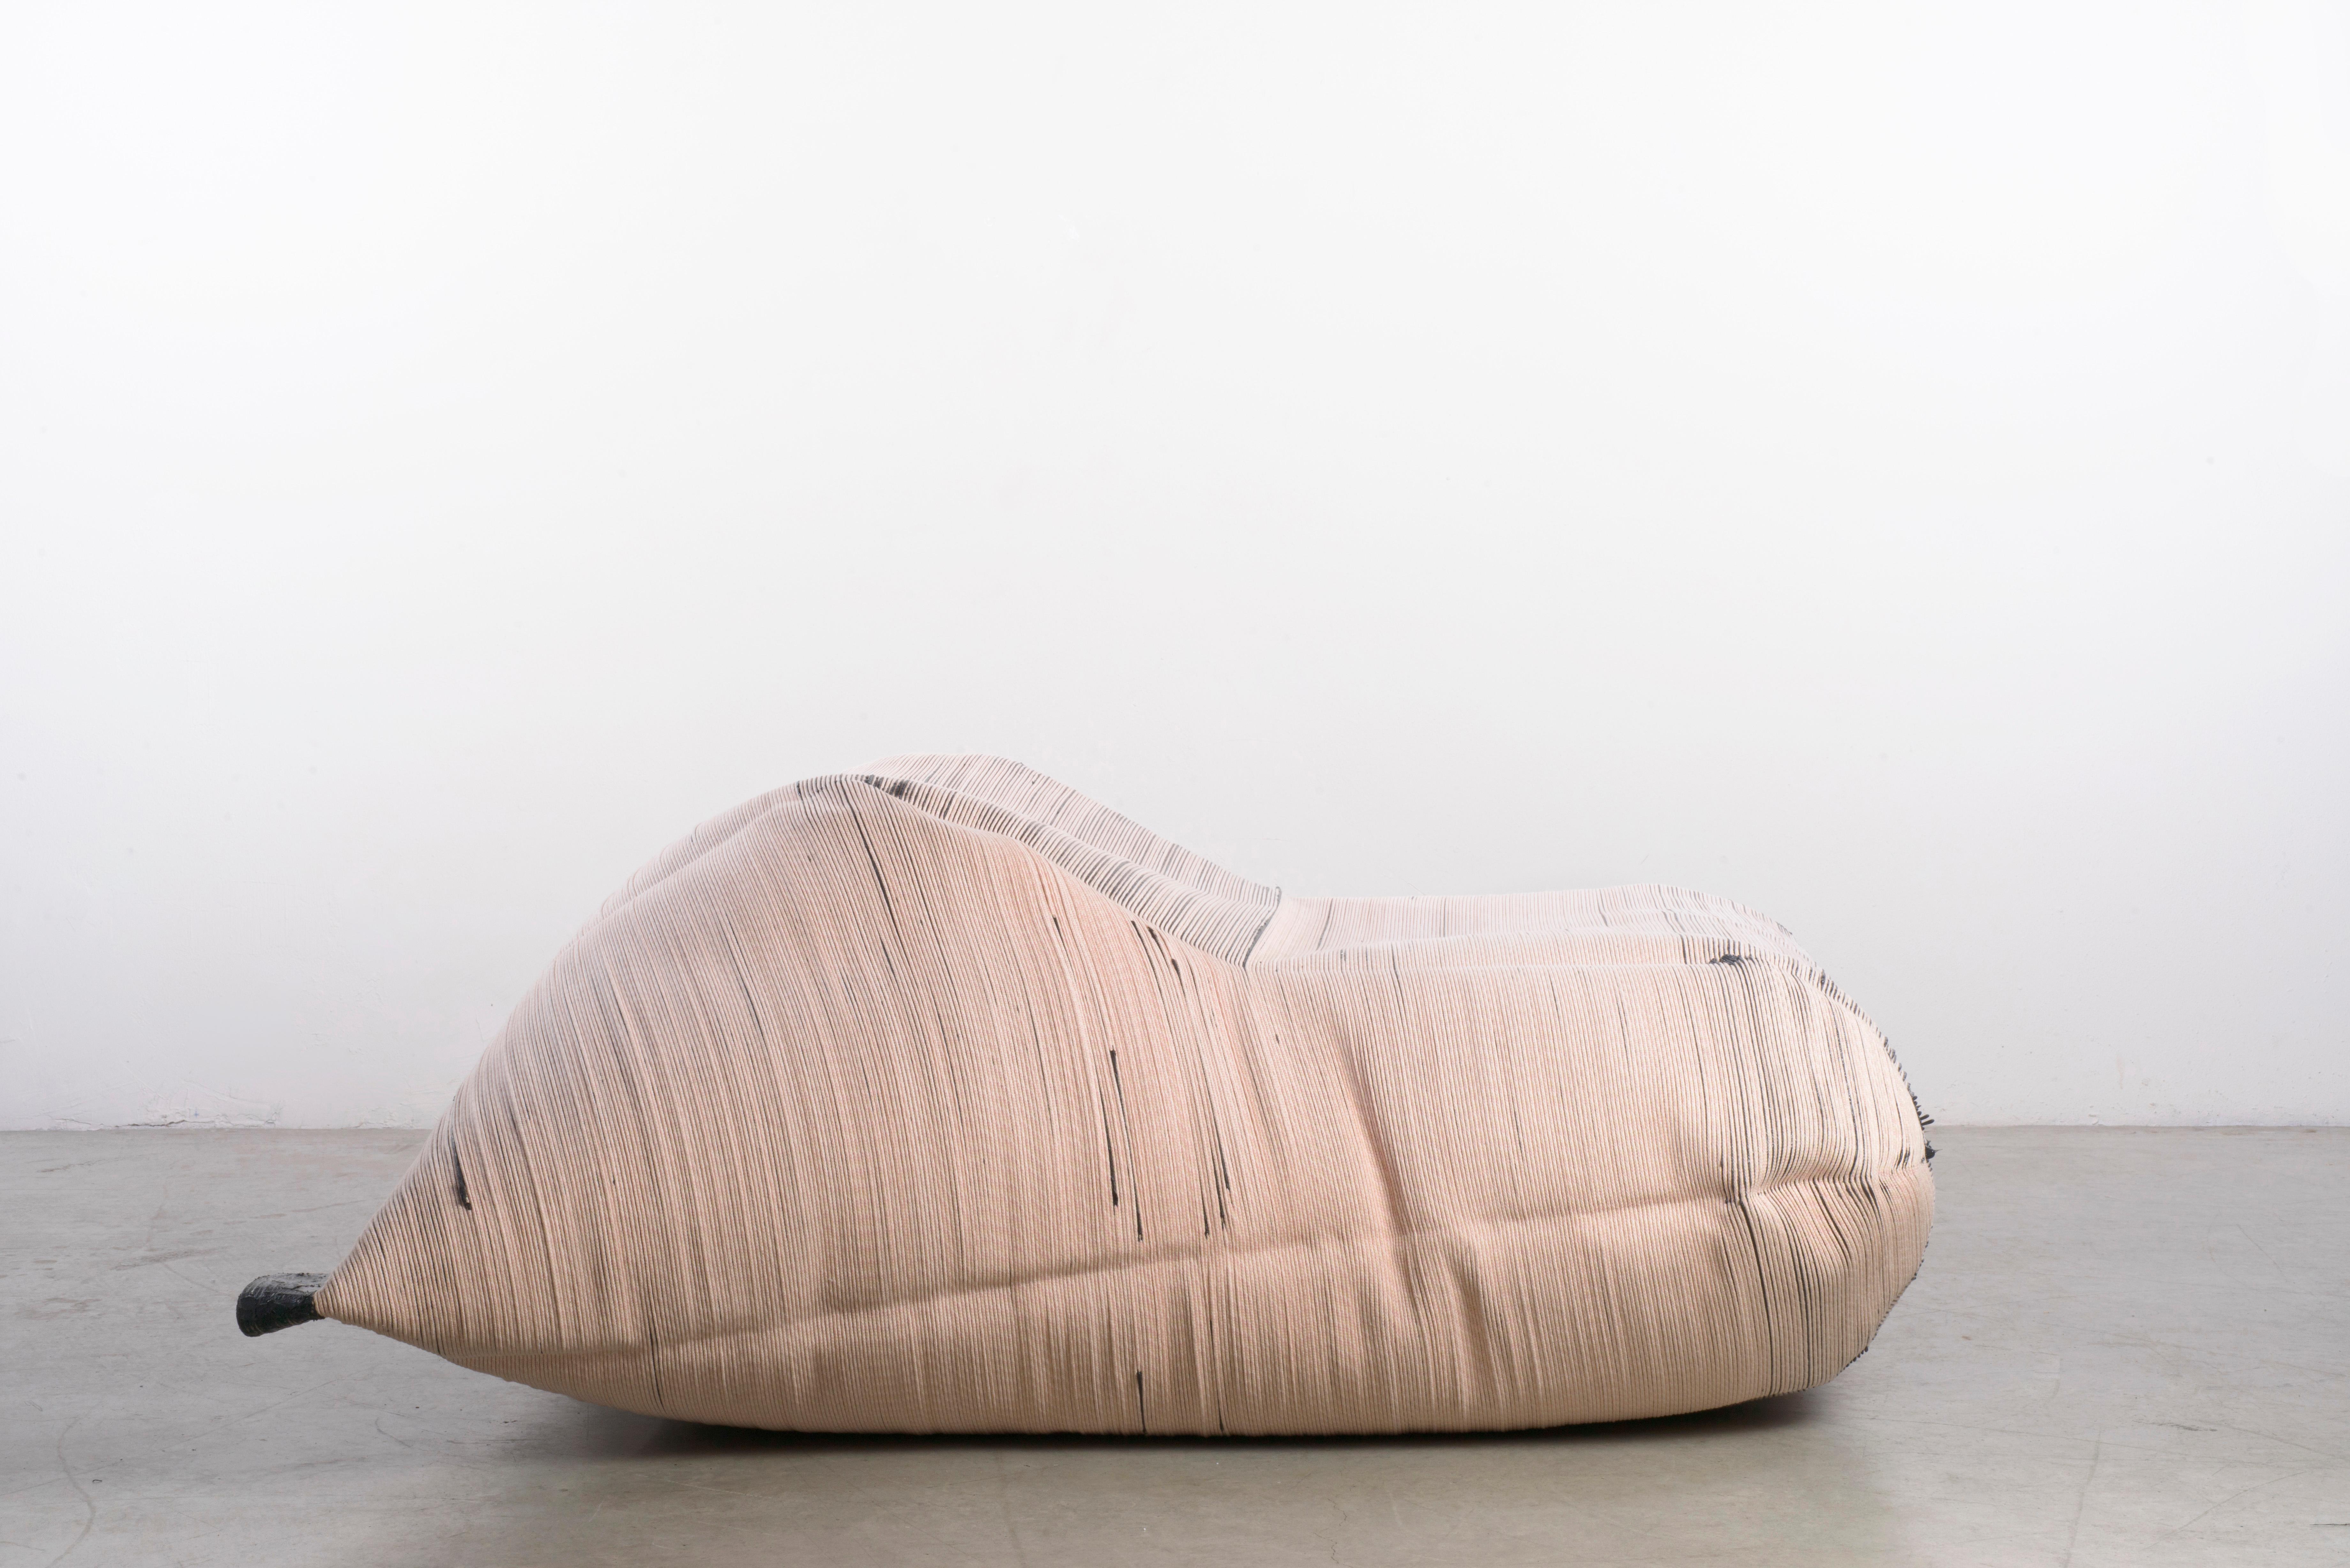 Big soft chair by Wendy Andreu, Regen Camouflage collection, France, 2019. Nilufar edition. Cotton, sylicone, polystyrene, feathers, zip. 148 x 140 x H 58 cm, 58.2 x 55 x H 22.8 in. The Regen Camouflage big soft chair is made in cotton rope and